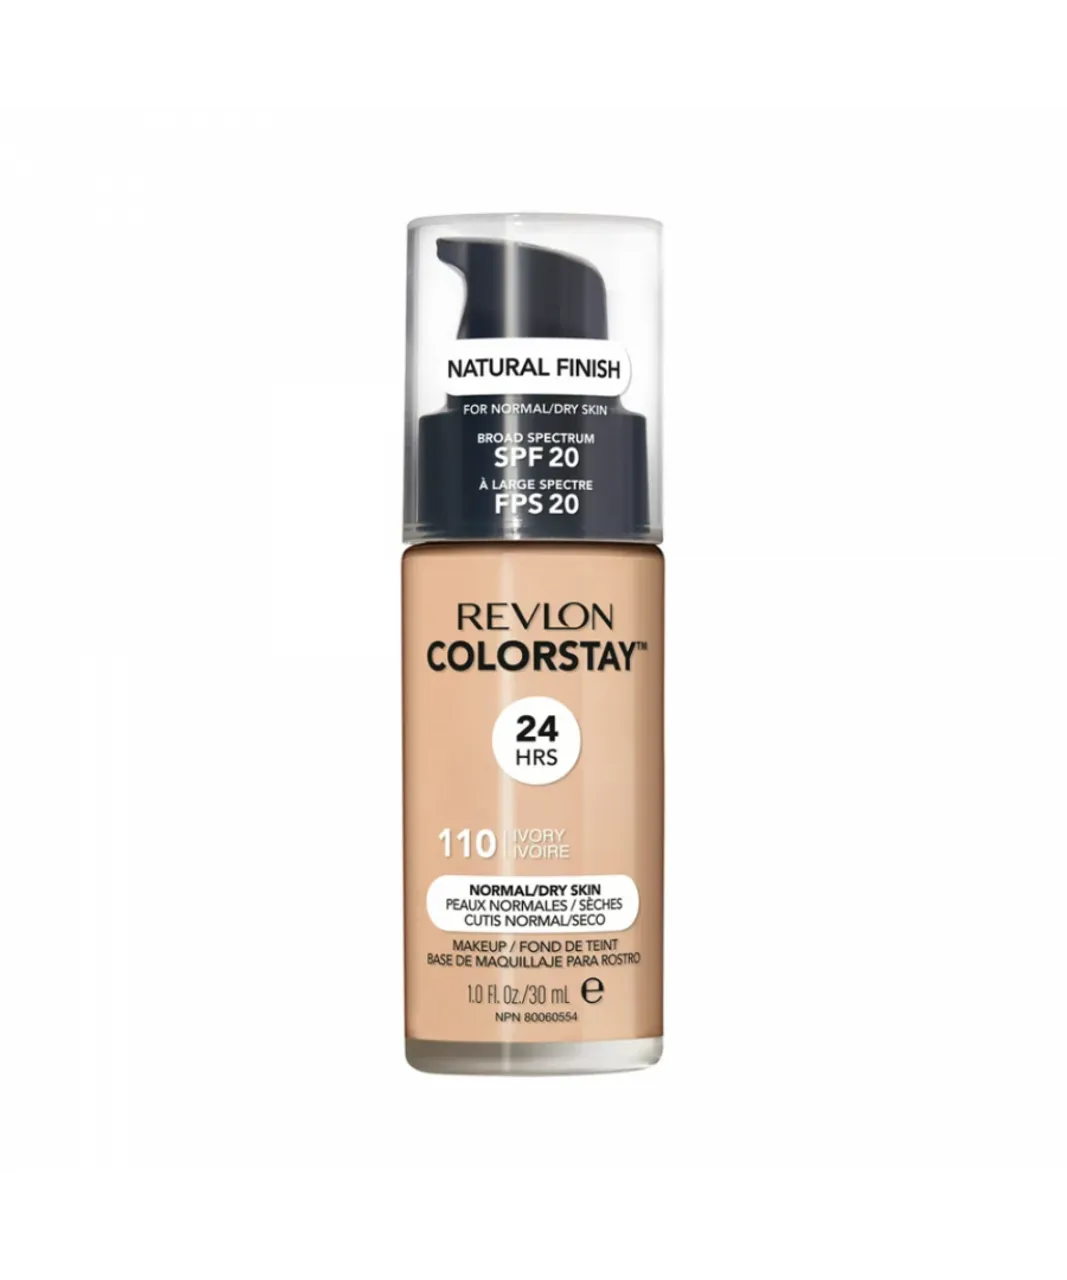 Revlon Womens Colorstay 24HRS Natural Finish For Normal Dry Skin SPF 20 - 110 Ivory - NA - One Size